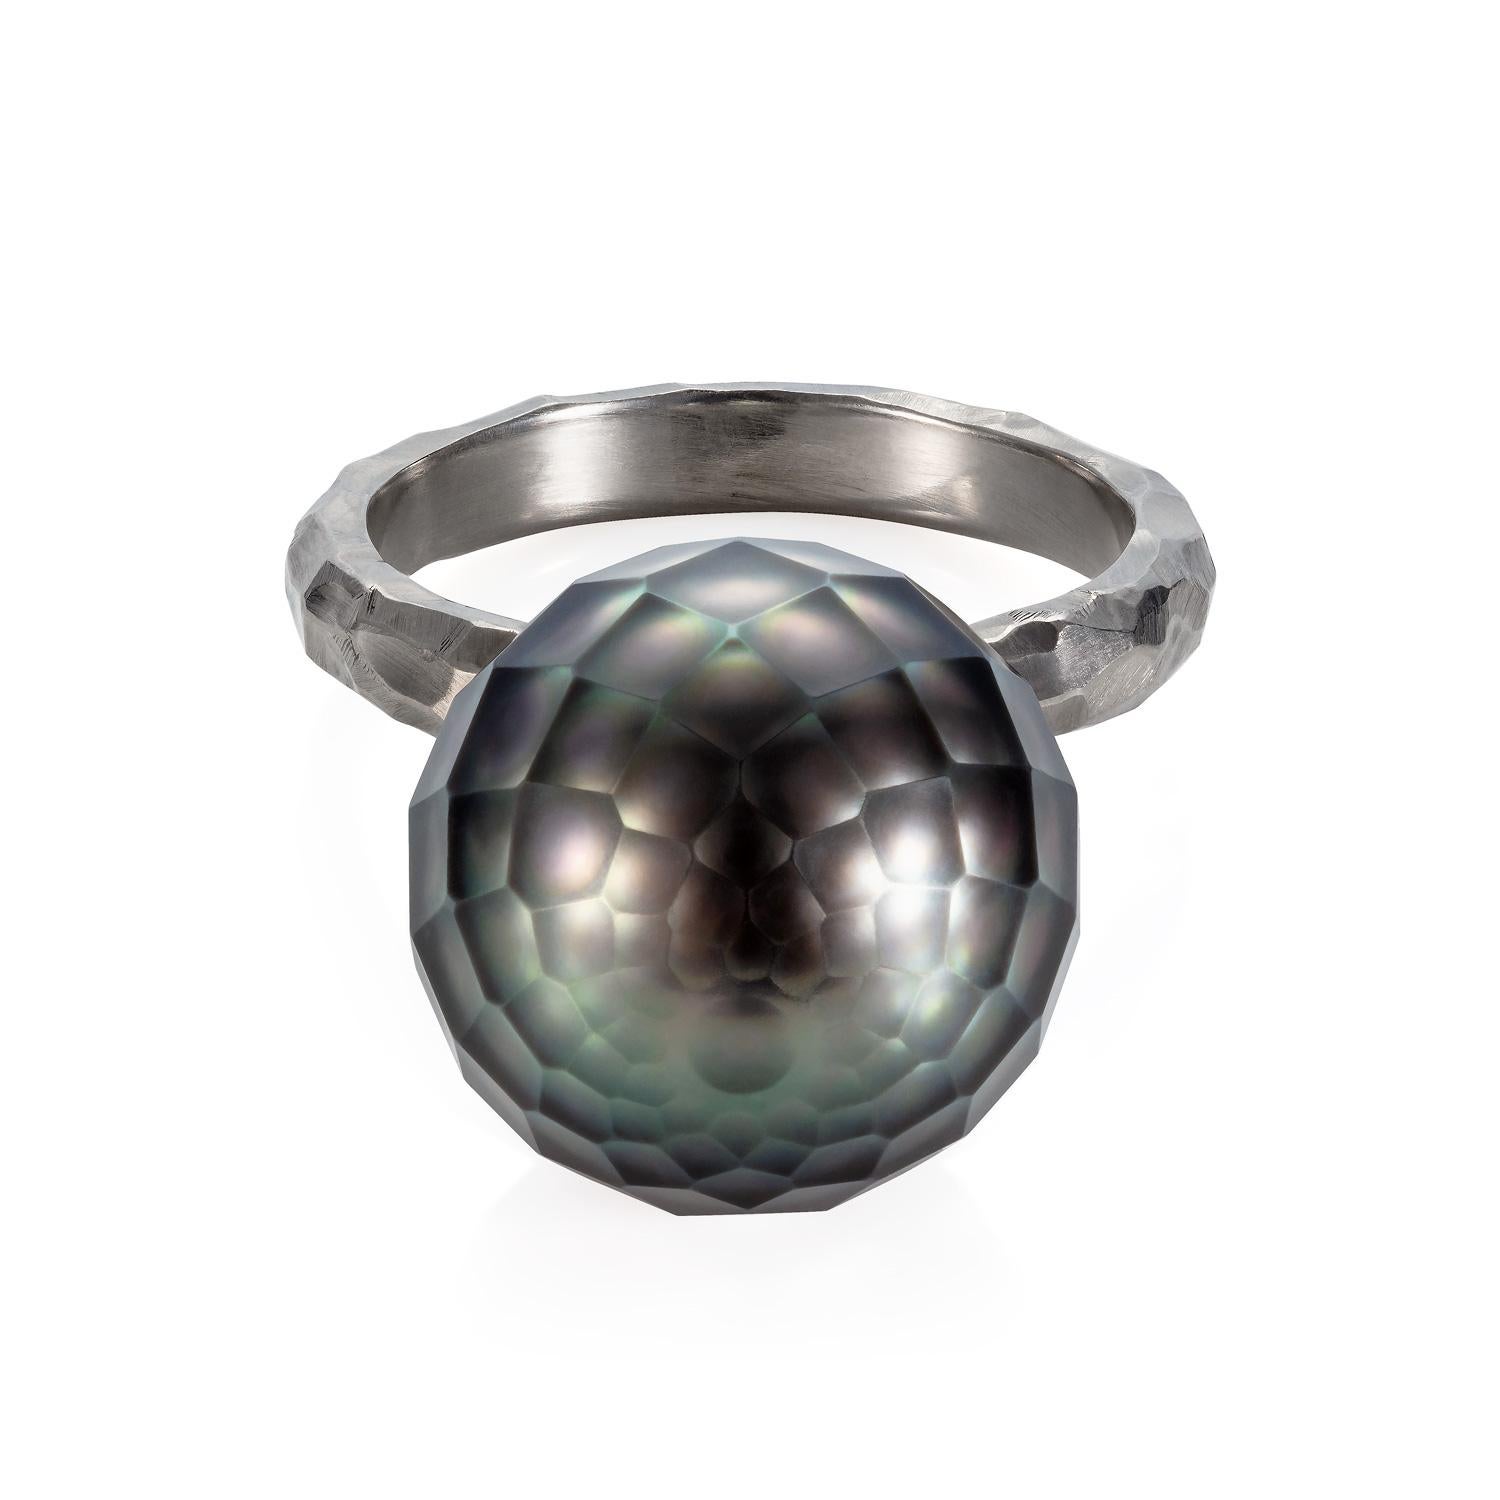 A very unique ring by Sweet Pea, made in 18k white gold. The hammered band is 3mm wide and has a brushed finish. The black Tahitian pearl is 14.5cm diameter and truly is a piece of art in itself. This one-off piece is a UK ring size M and will be